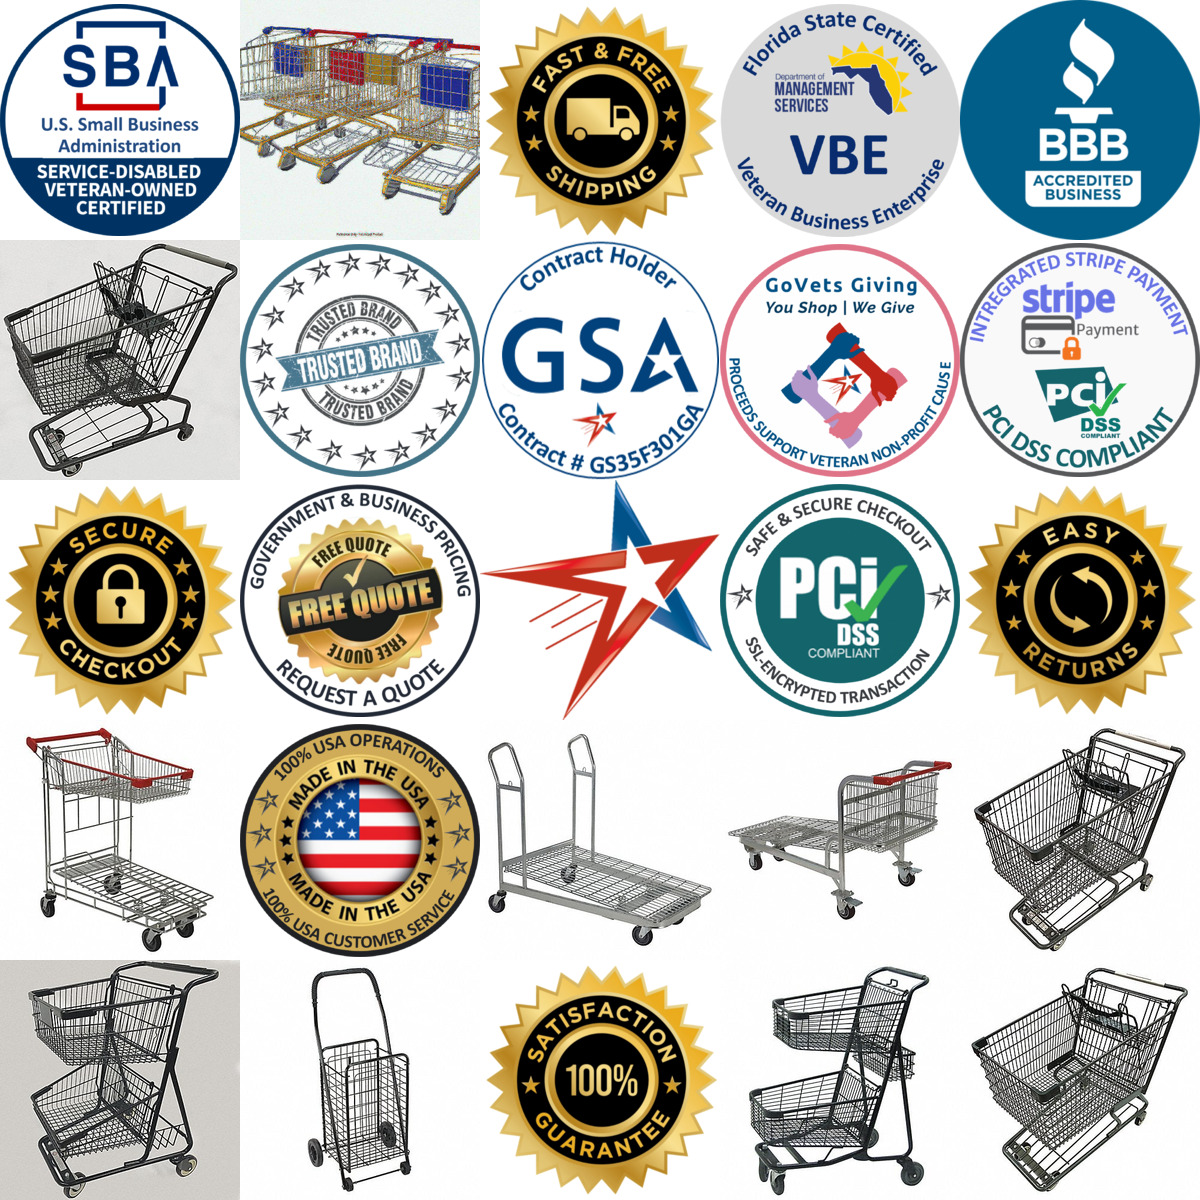 A selection of Shopping Carts products on GoVets